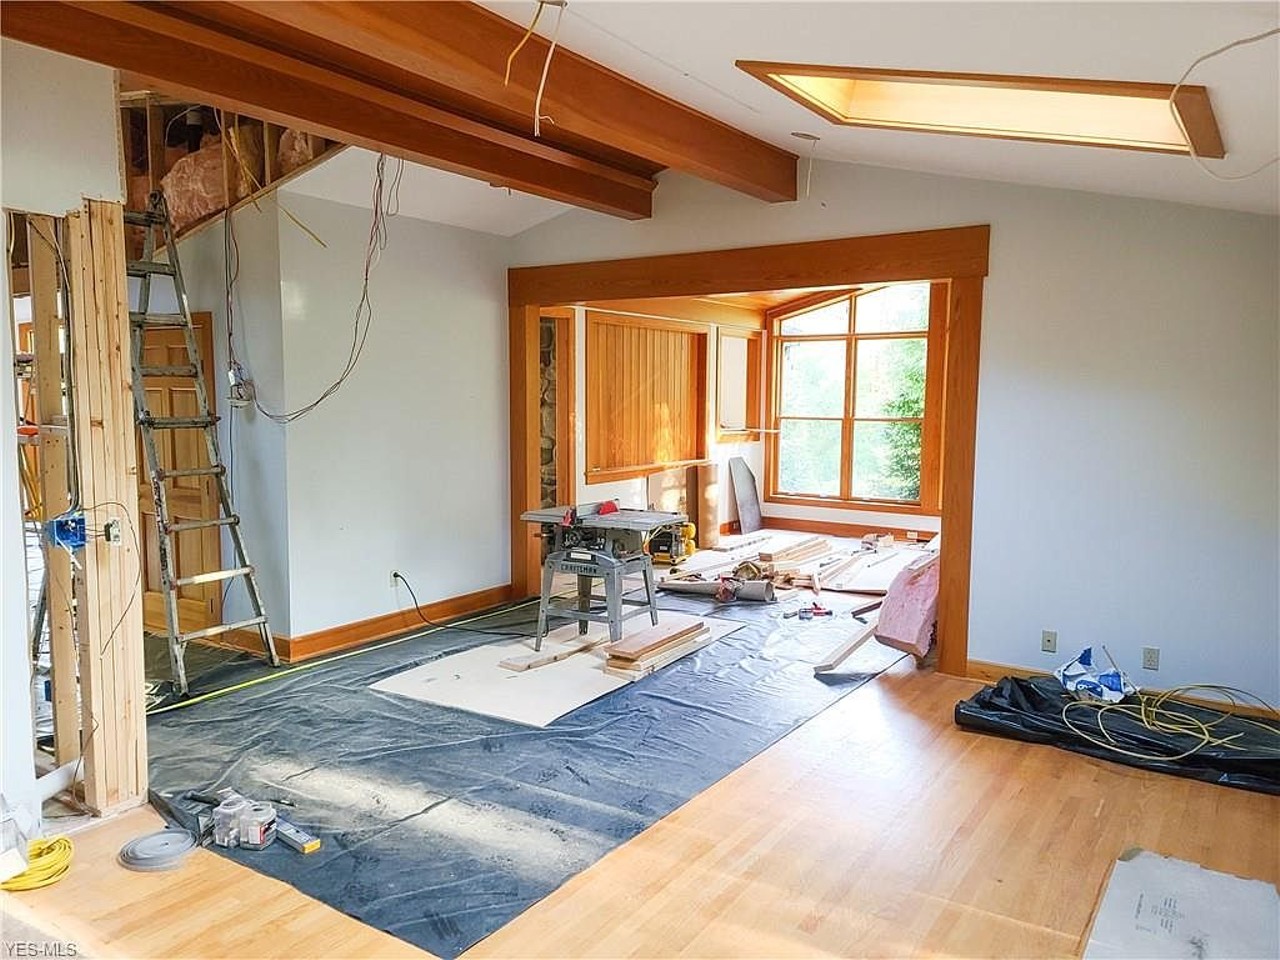 Who Wants to Pay $850,000 to Finish A Partially Renovated Home in Chagrin Falls?